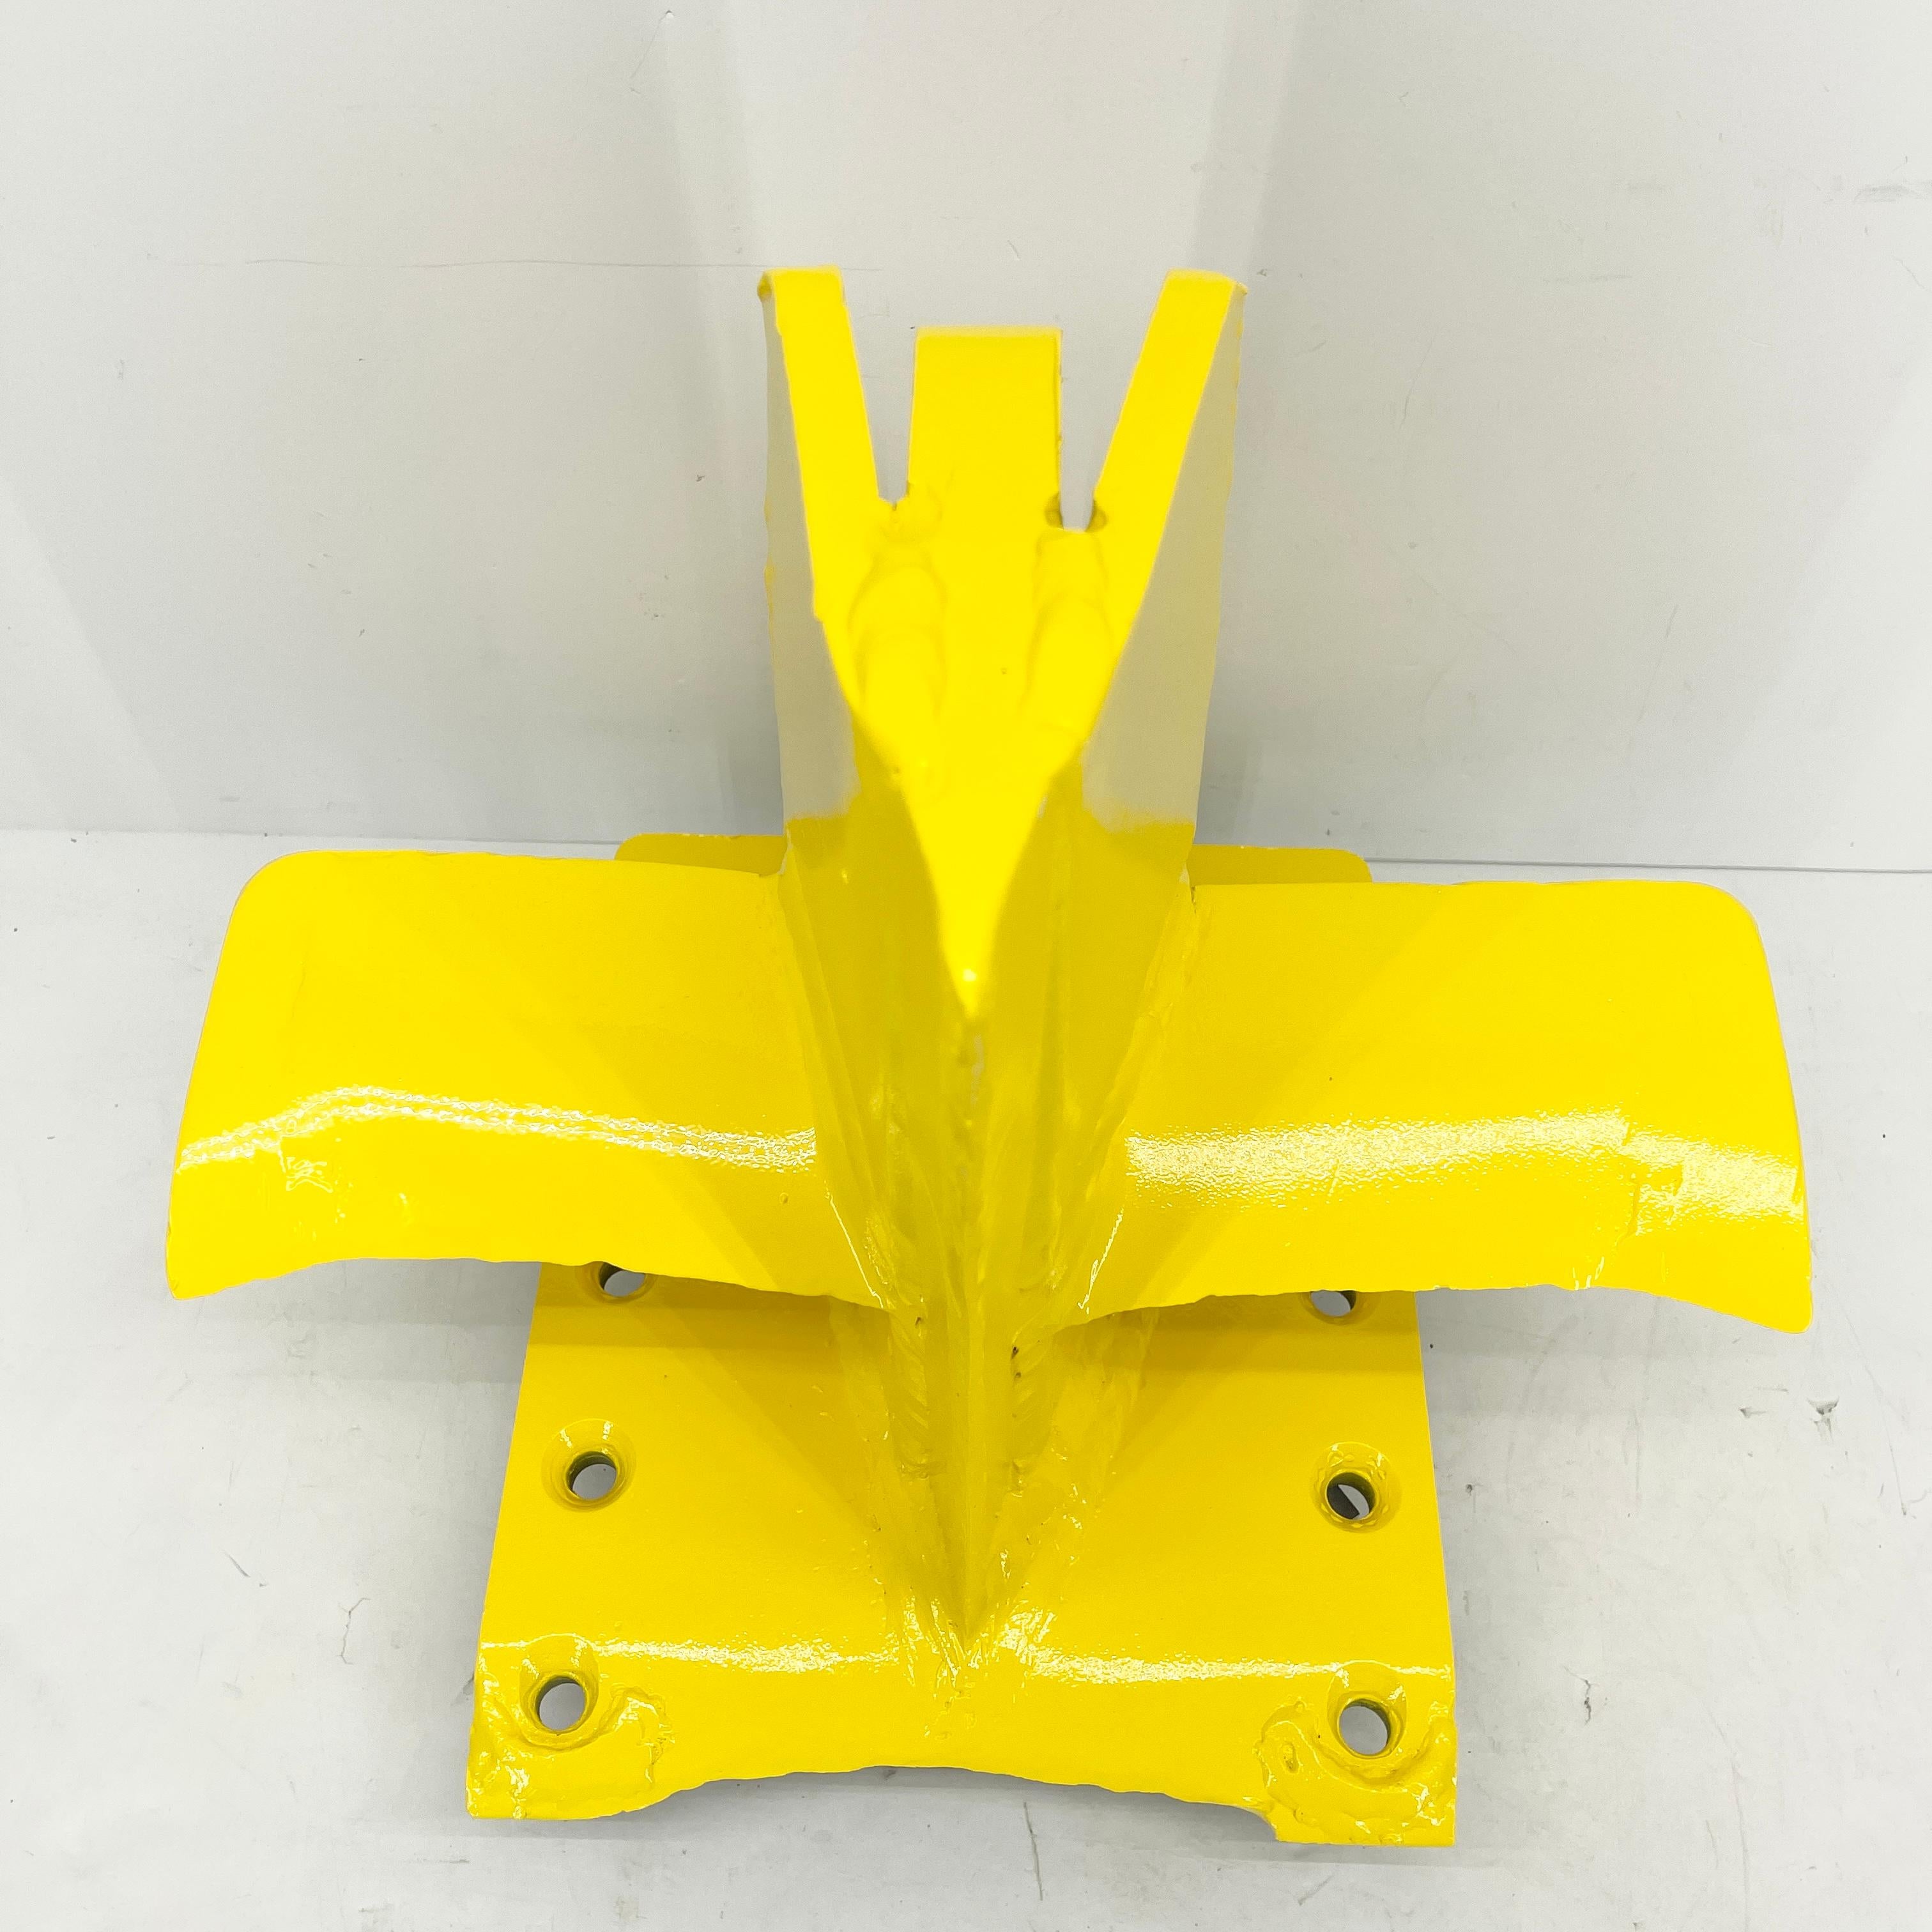 Industrial powder-coated eagle-shaped iron log splitter. Newly painted in thick bright sunshine yellow powder-coating. Just look at this heavy industrial iron wood splitter! The top piece is shaped like an eagle and the yellow paint is a real show